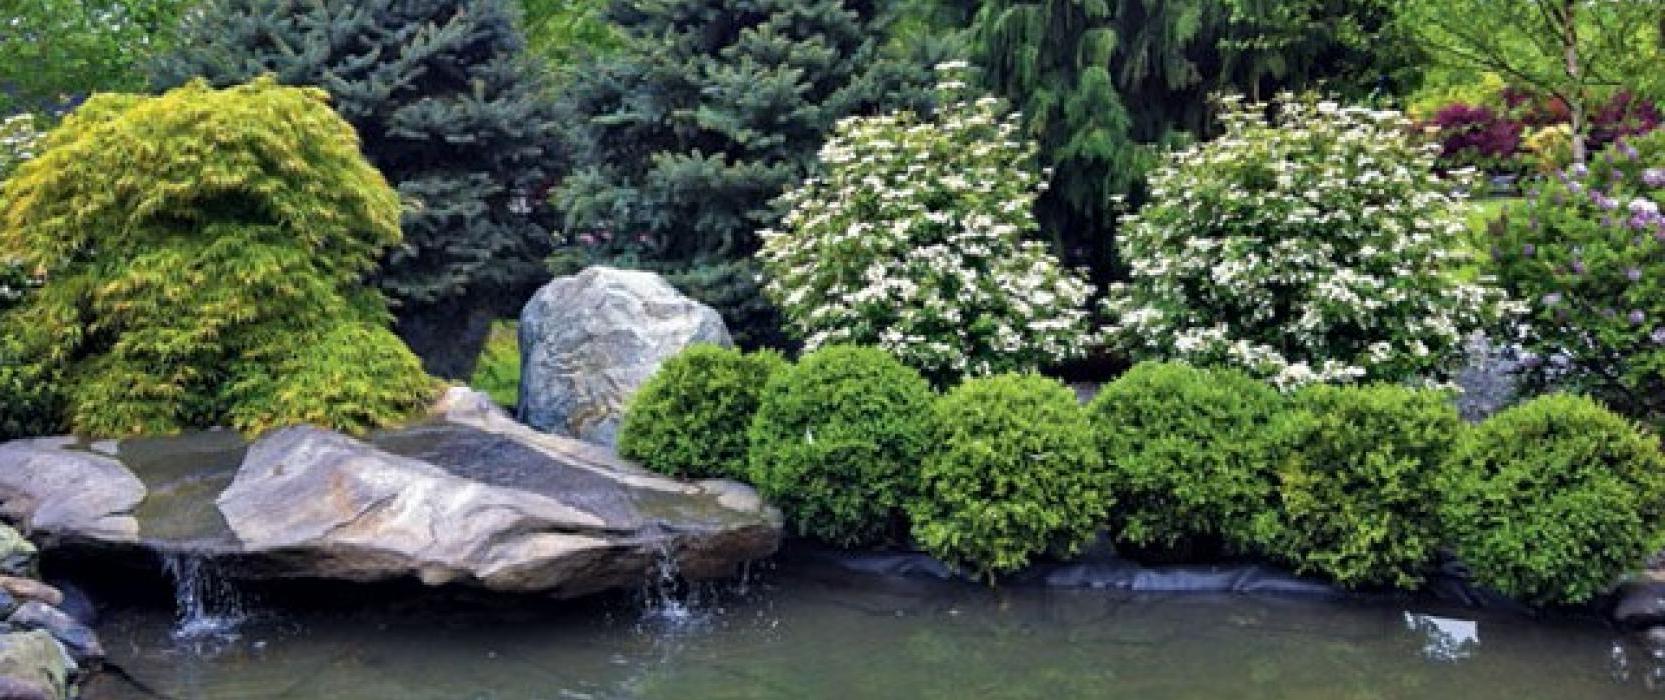 Landscape by Select Horticulture, Inc.